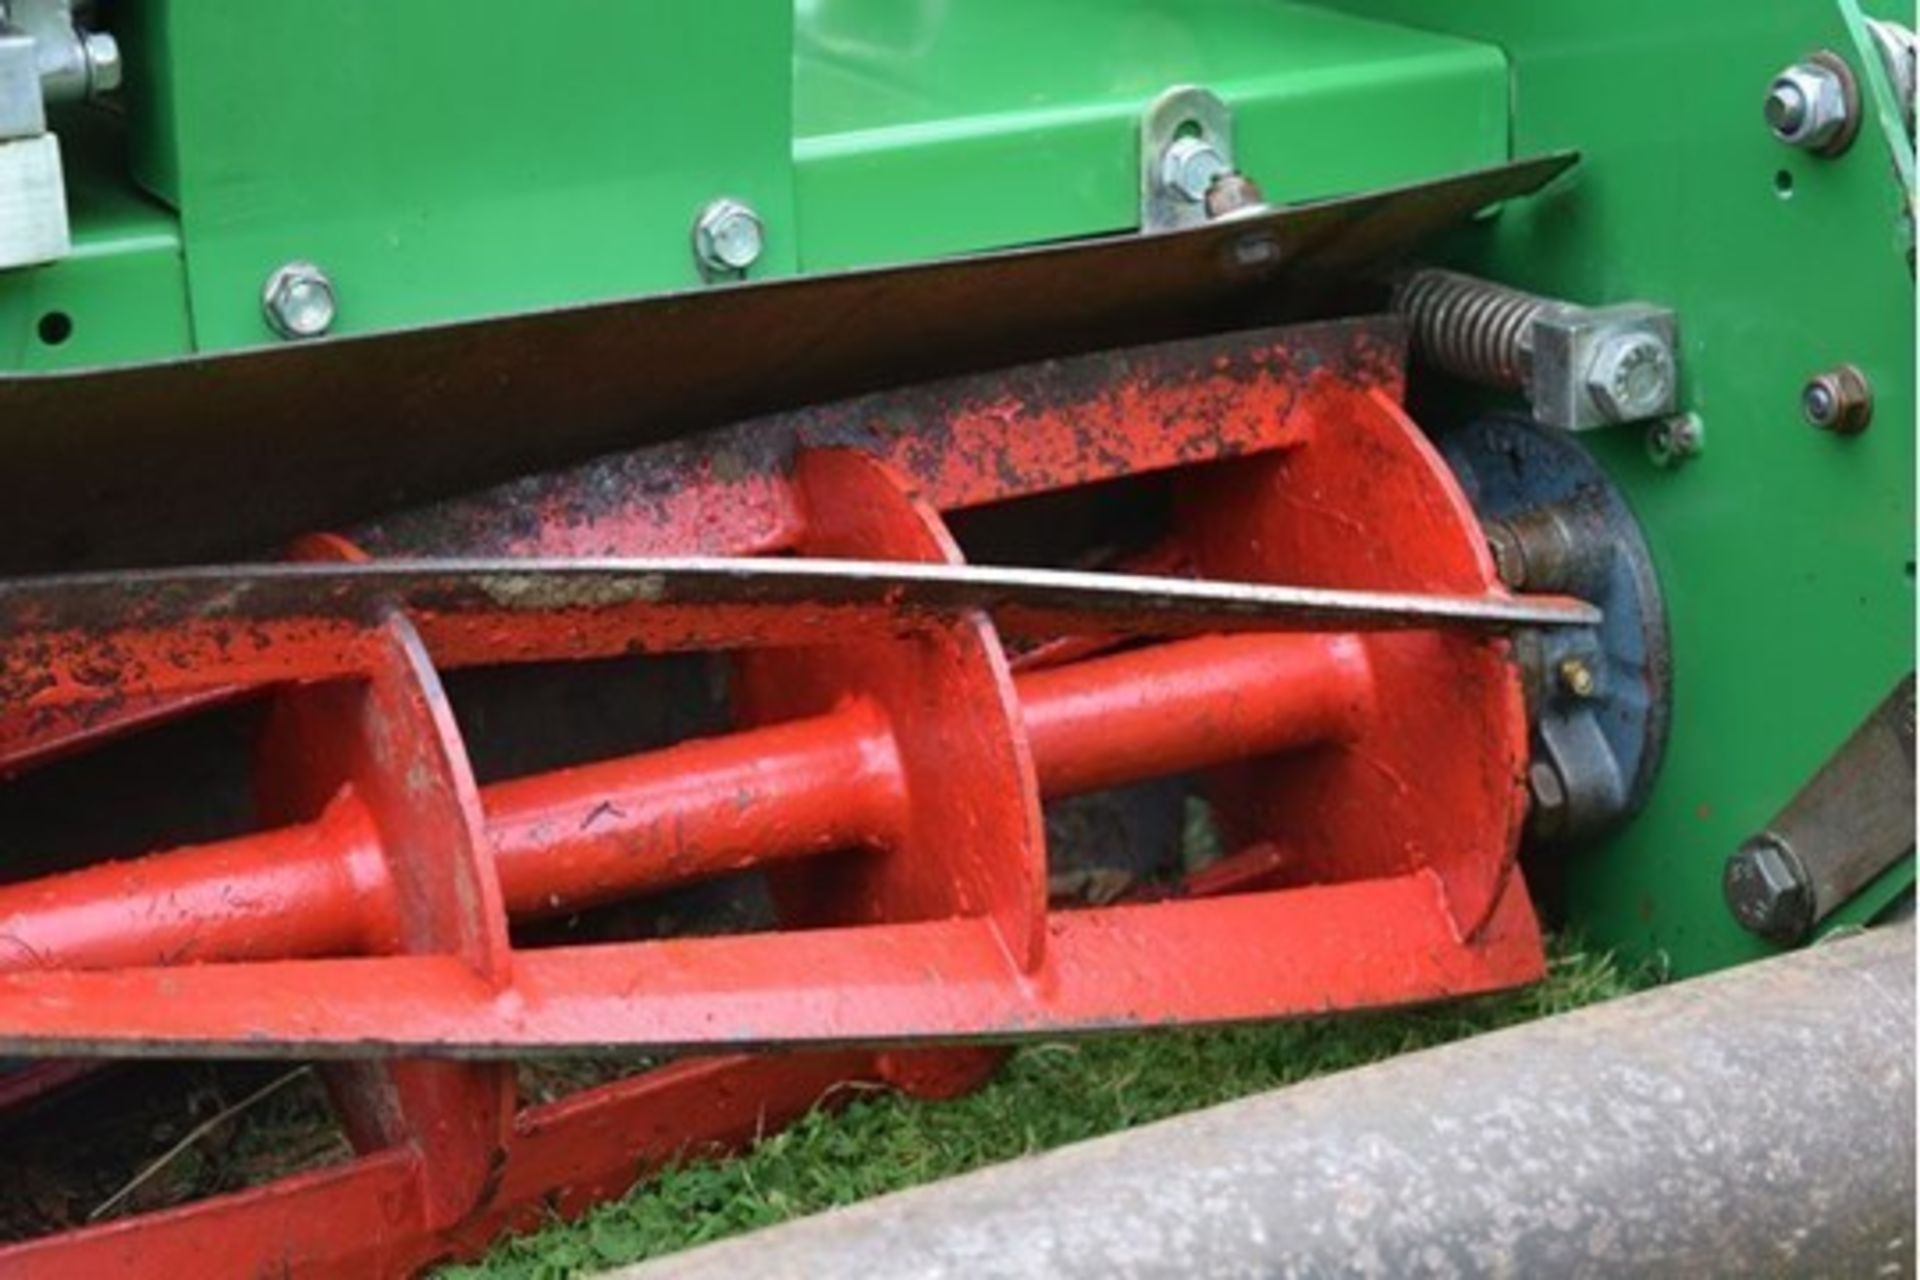 2004 Dennis G560 5 Blade Cylinder Mower With Grass Box - Image 4 of 12